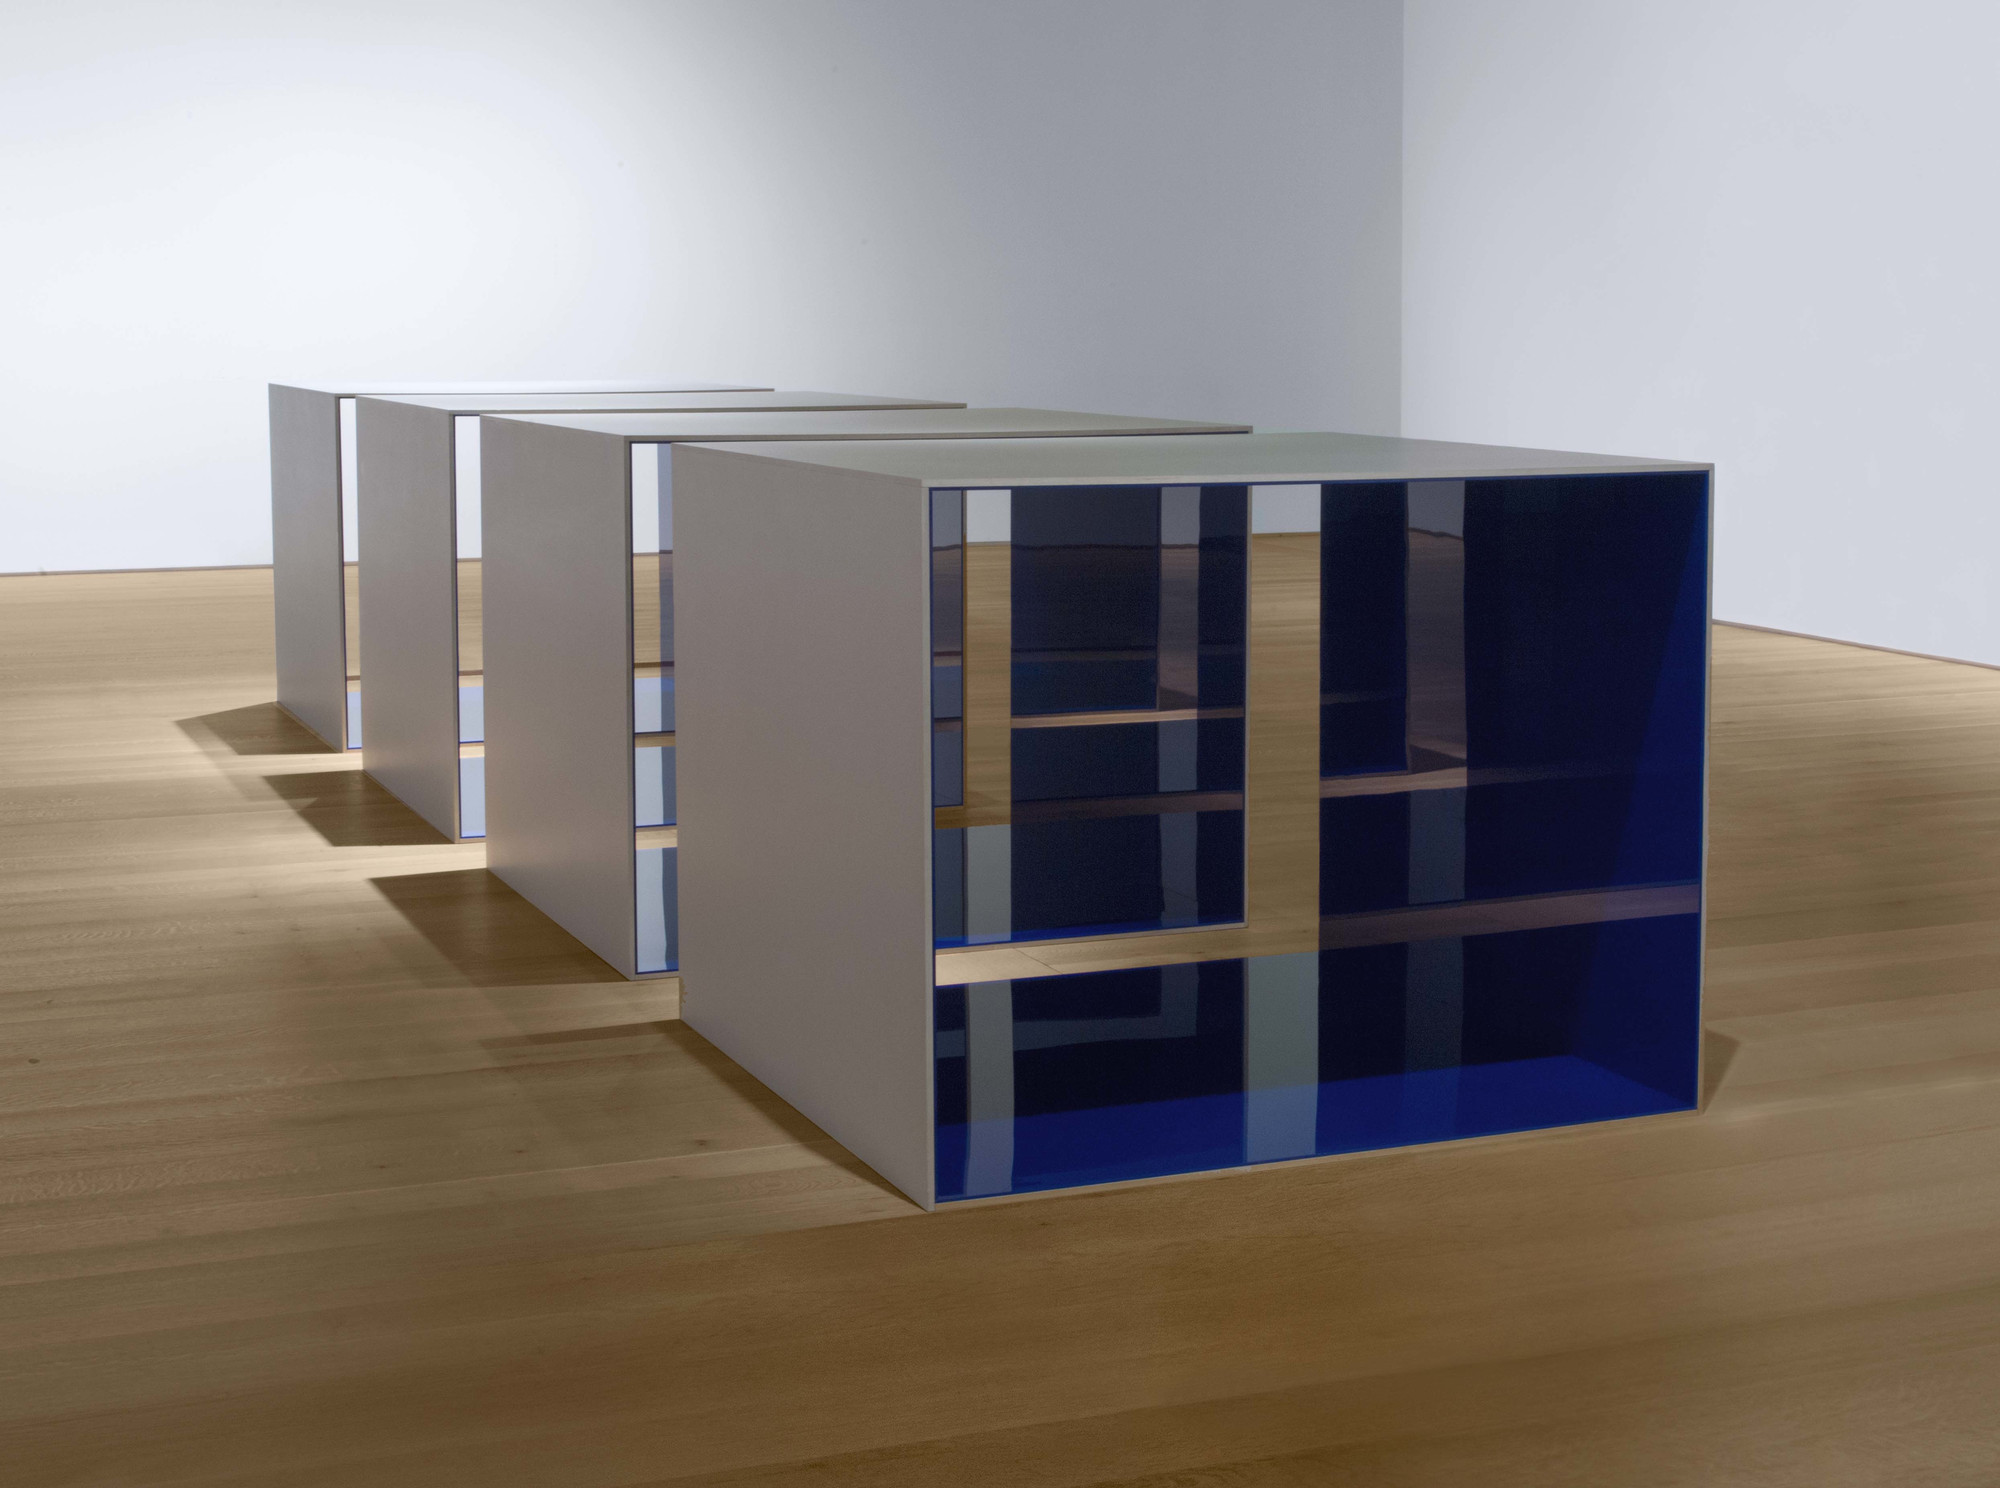 Donald Judd. _Untitled_. 1969. Clear anodized aluminum and blue Plexiglas. Four units, each 48 × 60 × 60" (121.9 × 152.4 × 152.4 cm), with 12" (30.5 cm) intervals. Overall: 48 × 276 × 60" (121.9 × 701 × 152.4 cm). Saint Louis Art Museum. © 2020 Judd Foundation / Artists Rights Society (ARS), New York